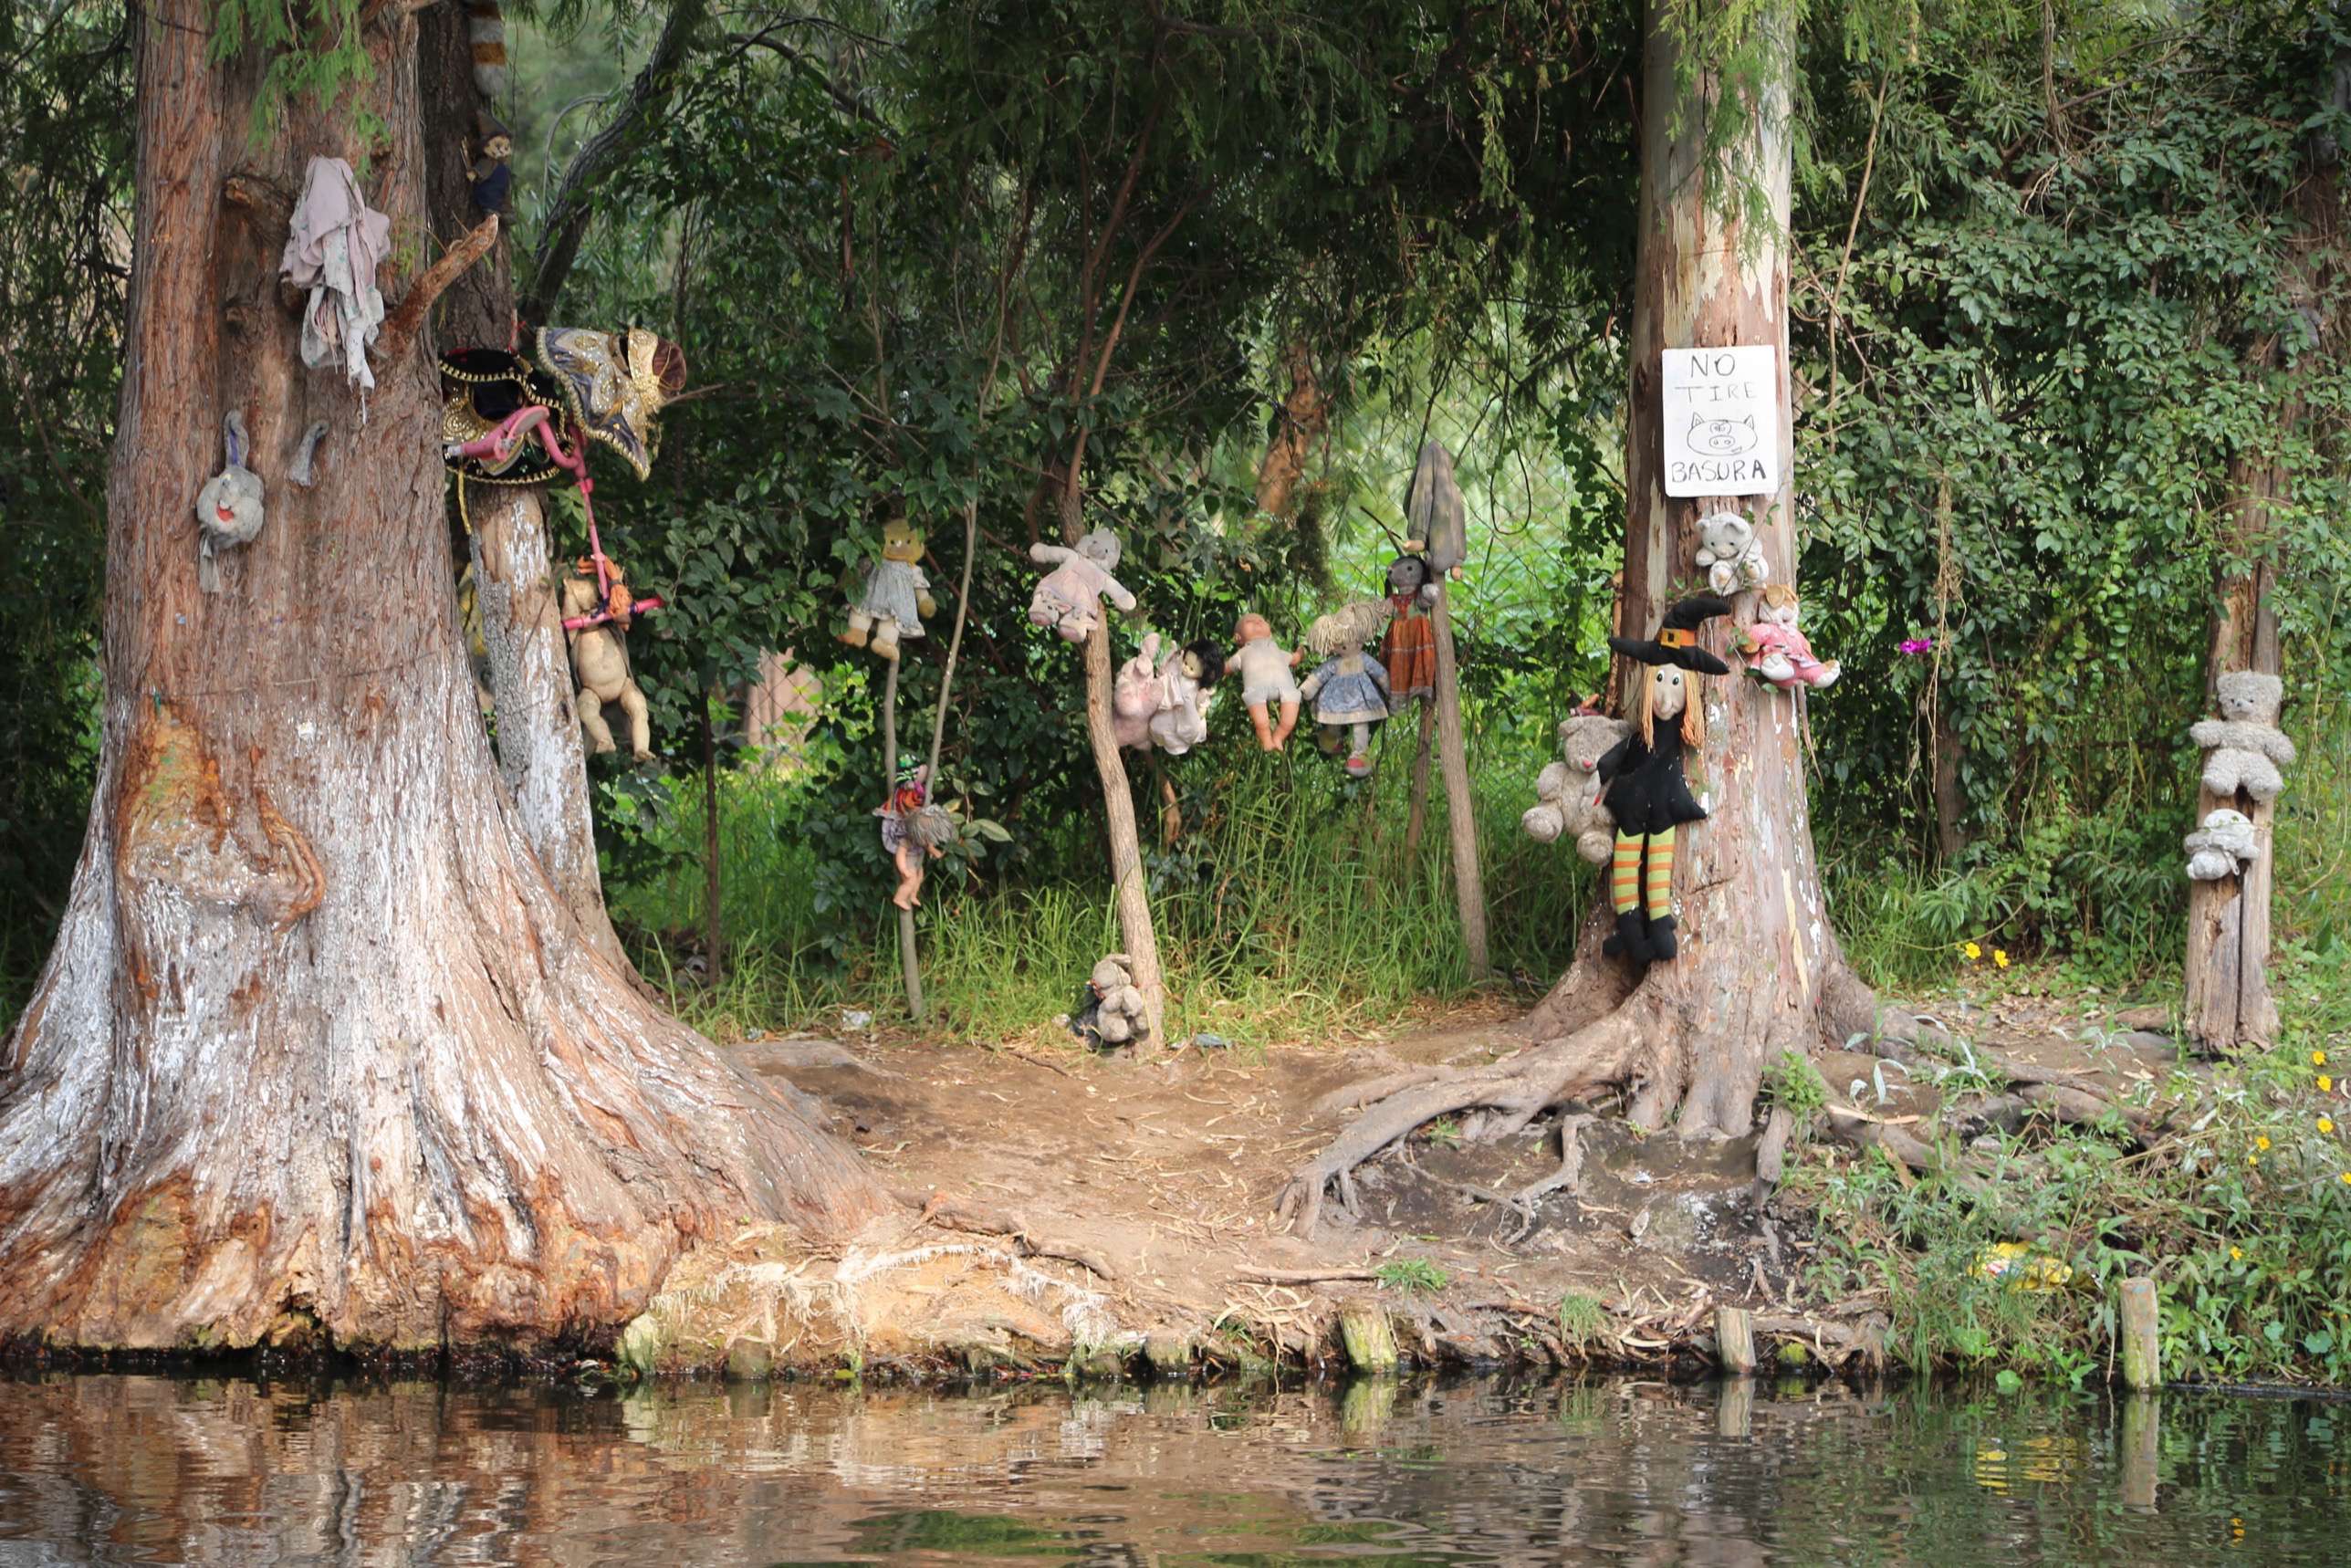 The Island of the Dolls is a reminder of when a little girl drowned and was found at this spot along the canals.